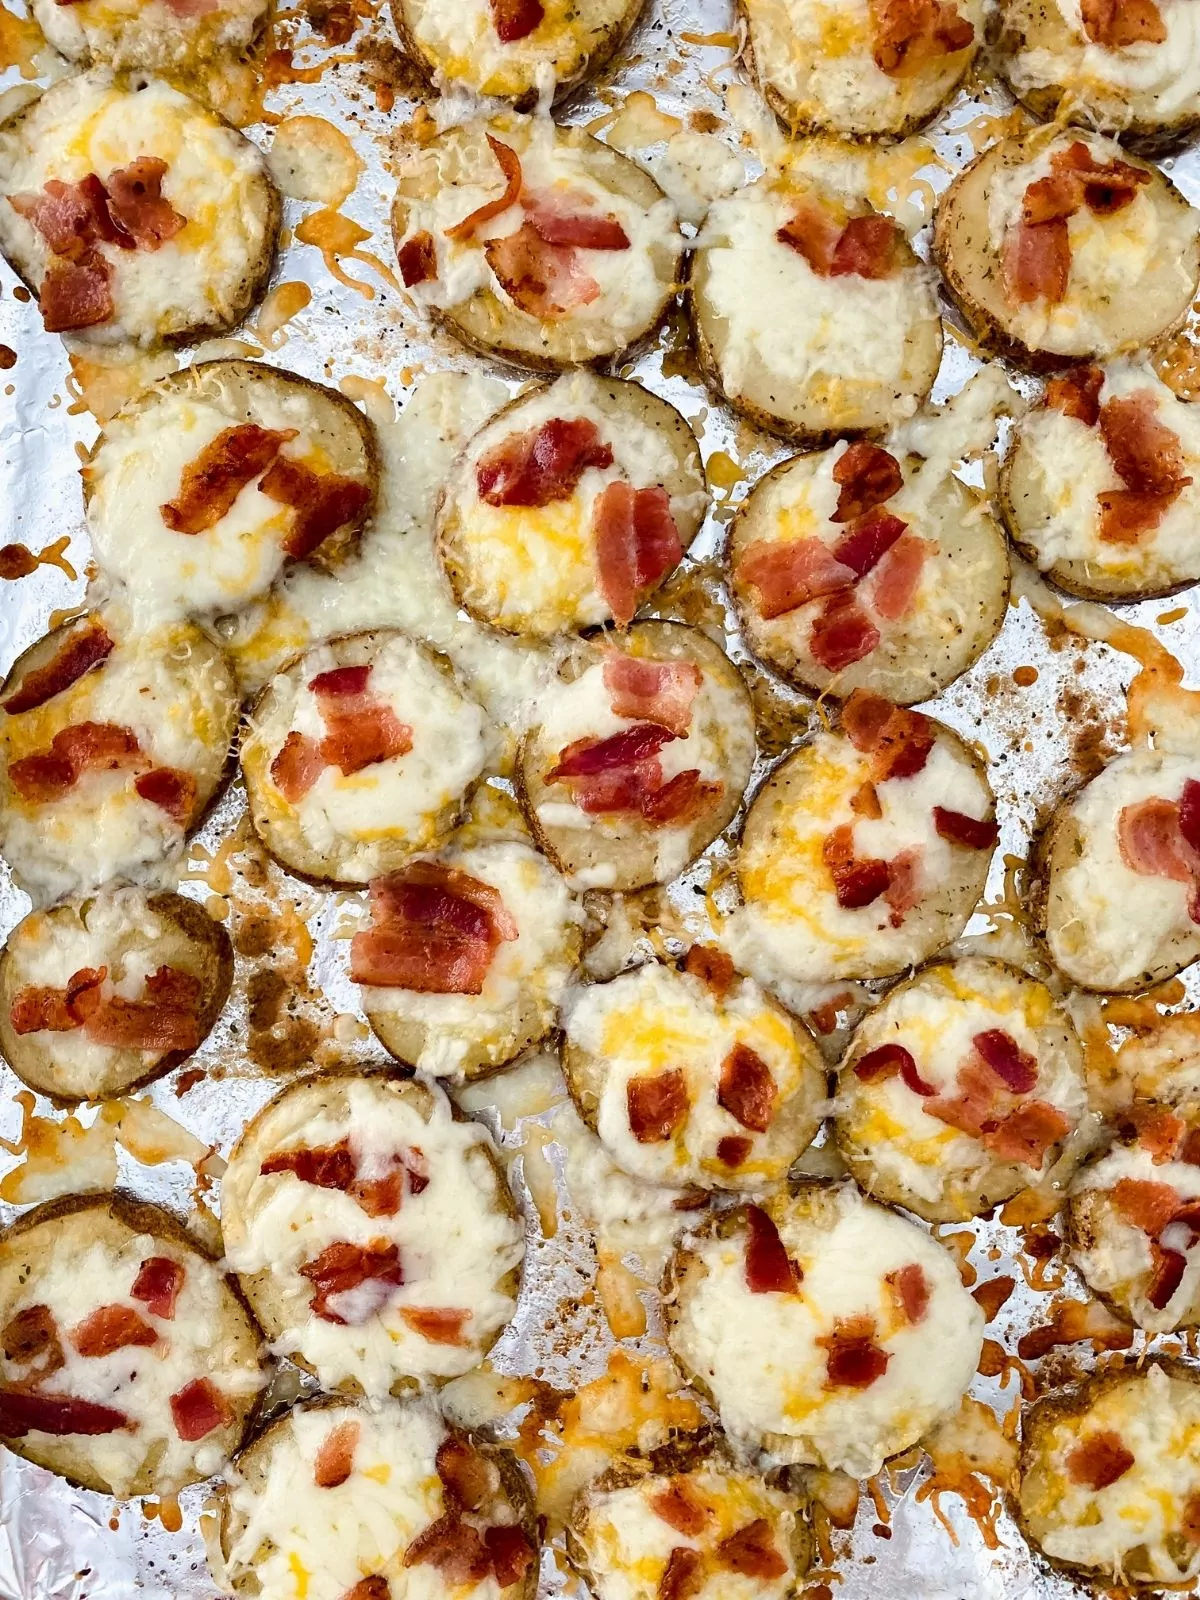 Melted cheese on potato slices with bacon.